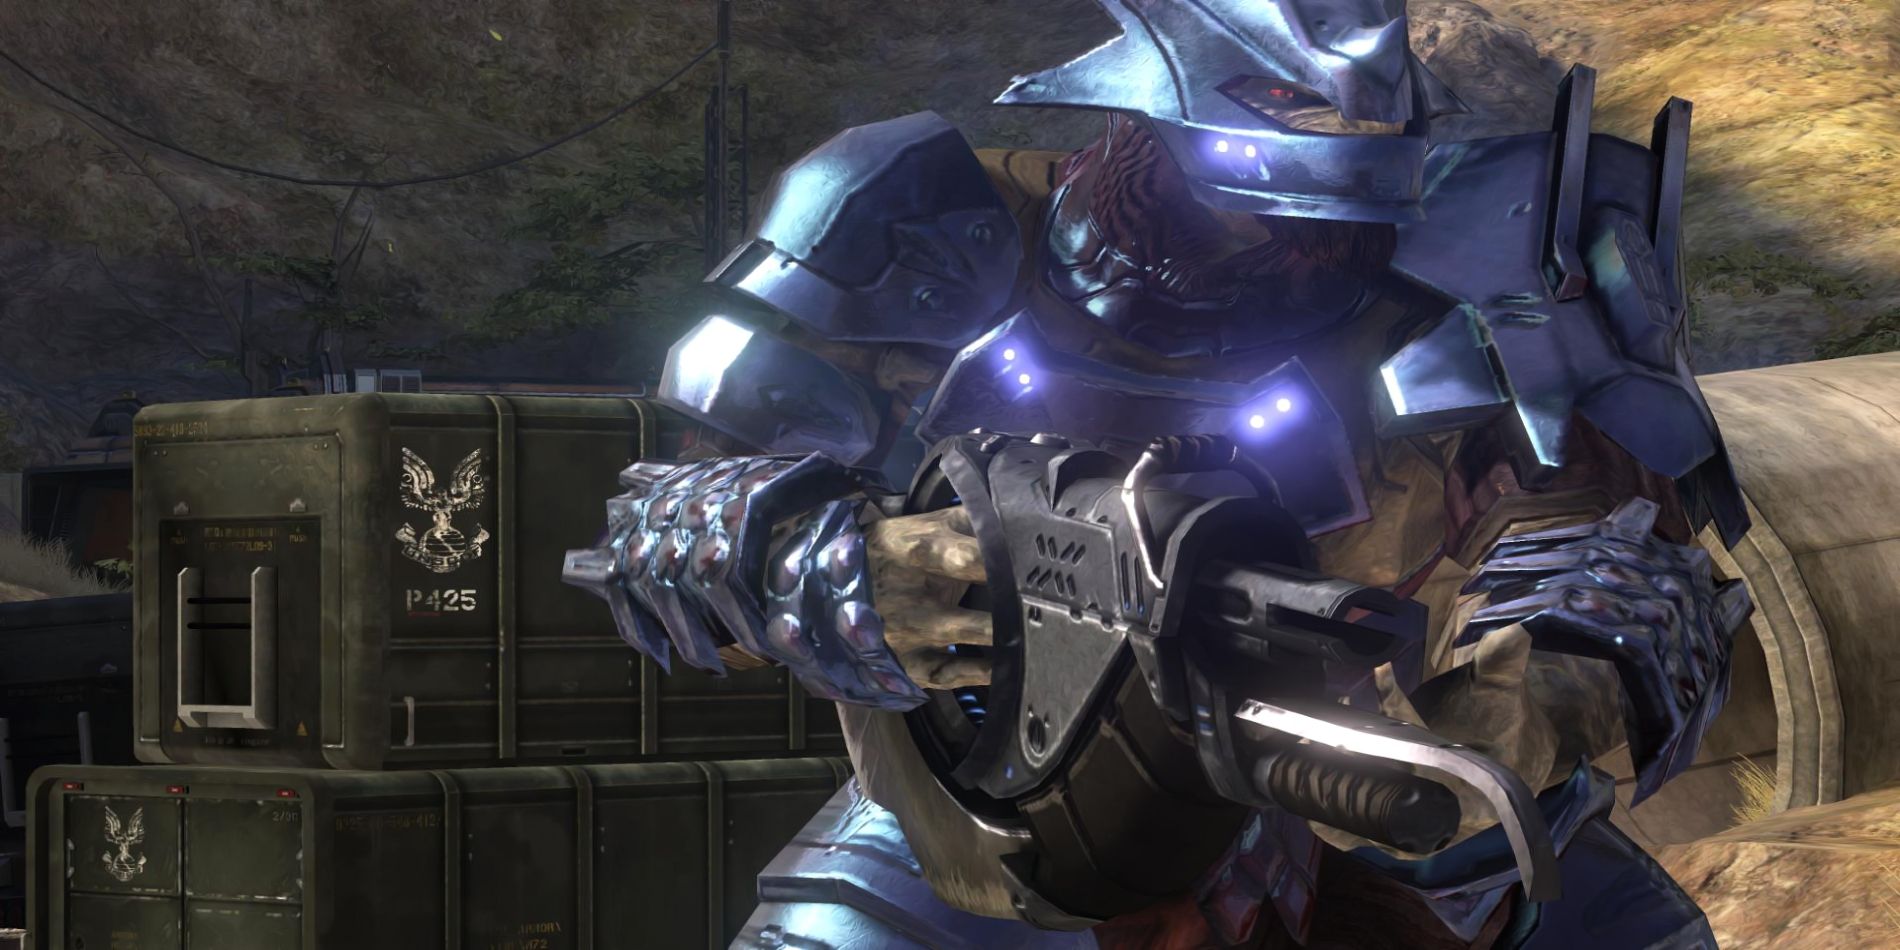 A Covenant soldier from the Halo video game franchise.